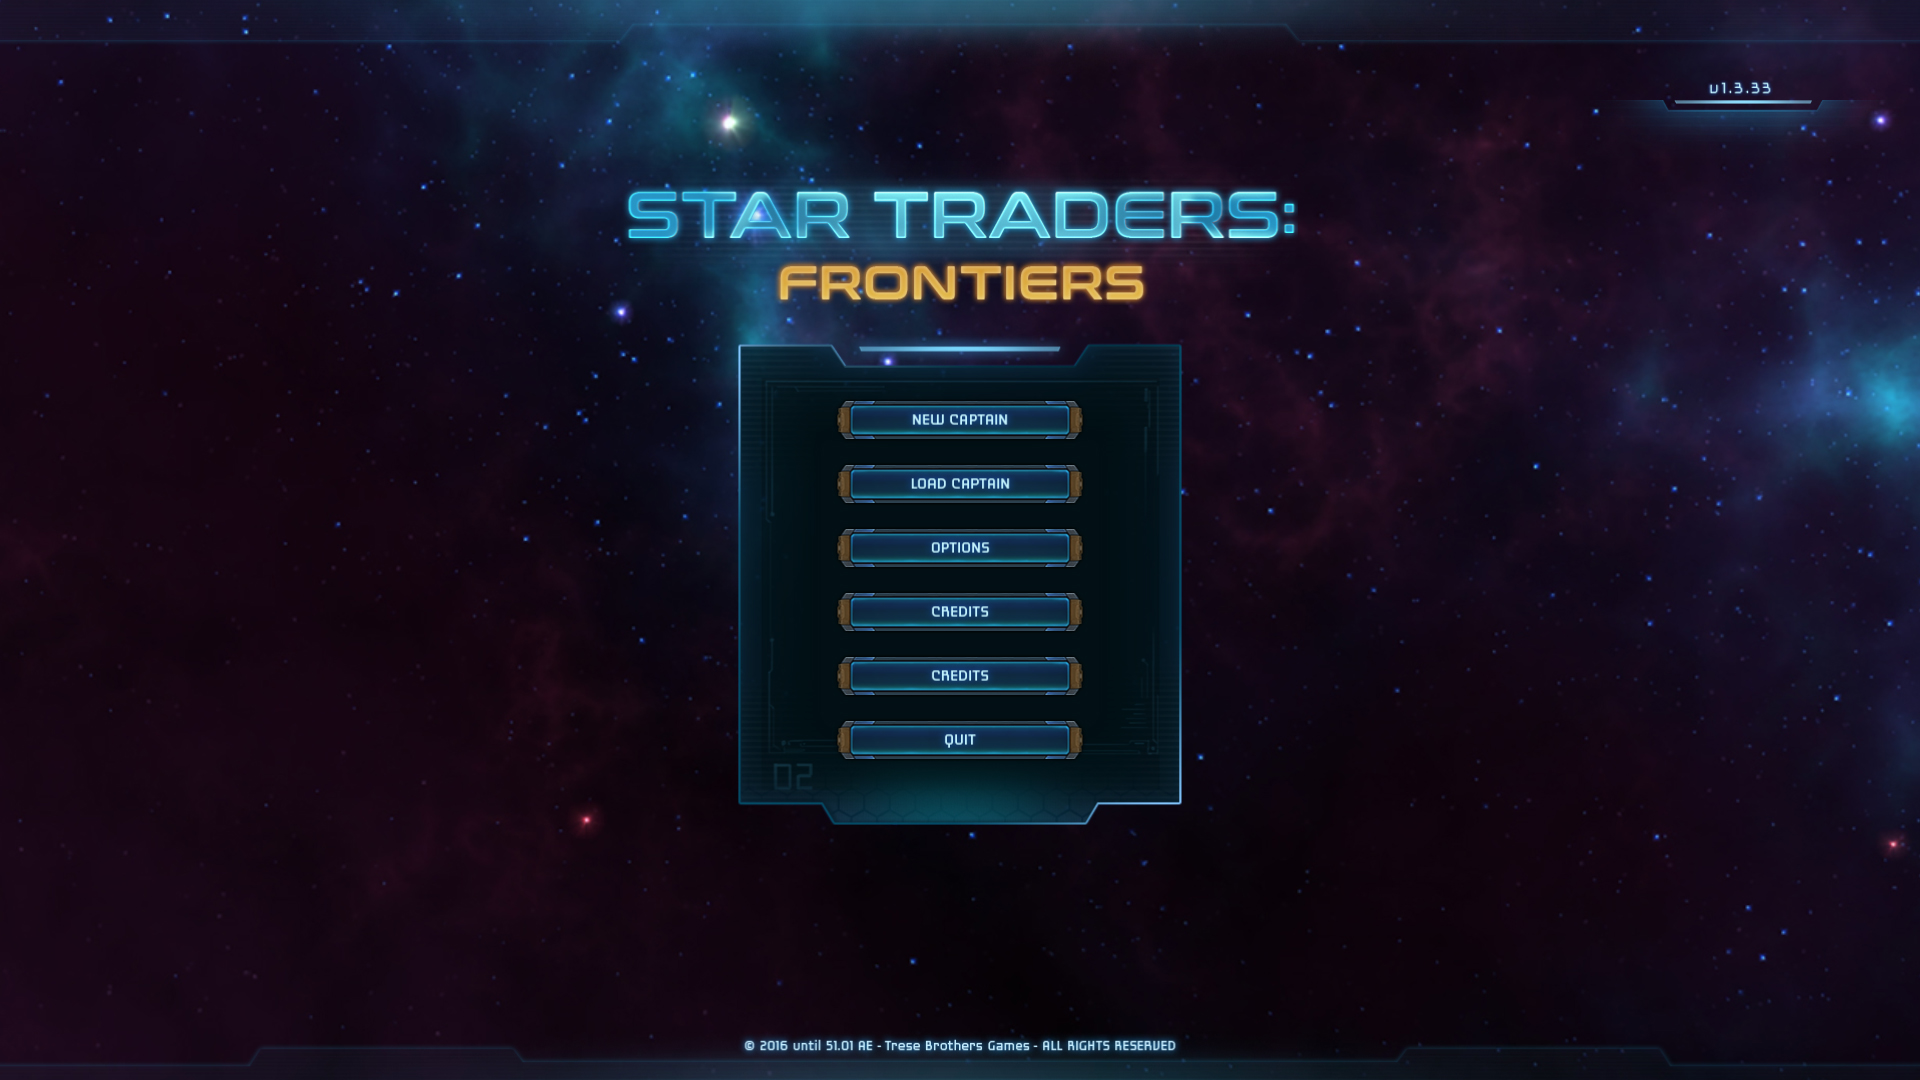 Star Traders: Frontiers Soundtrack Featured Screenshot #1